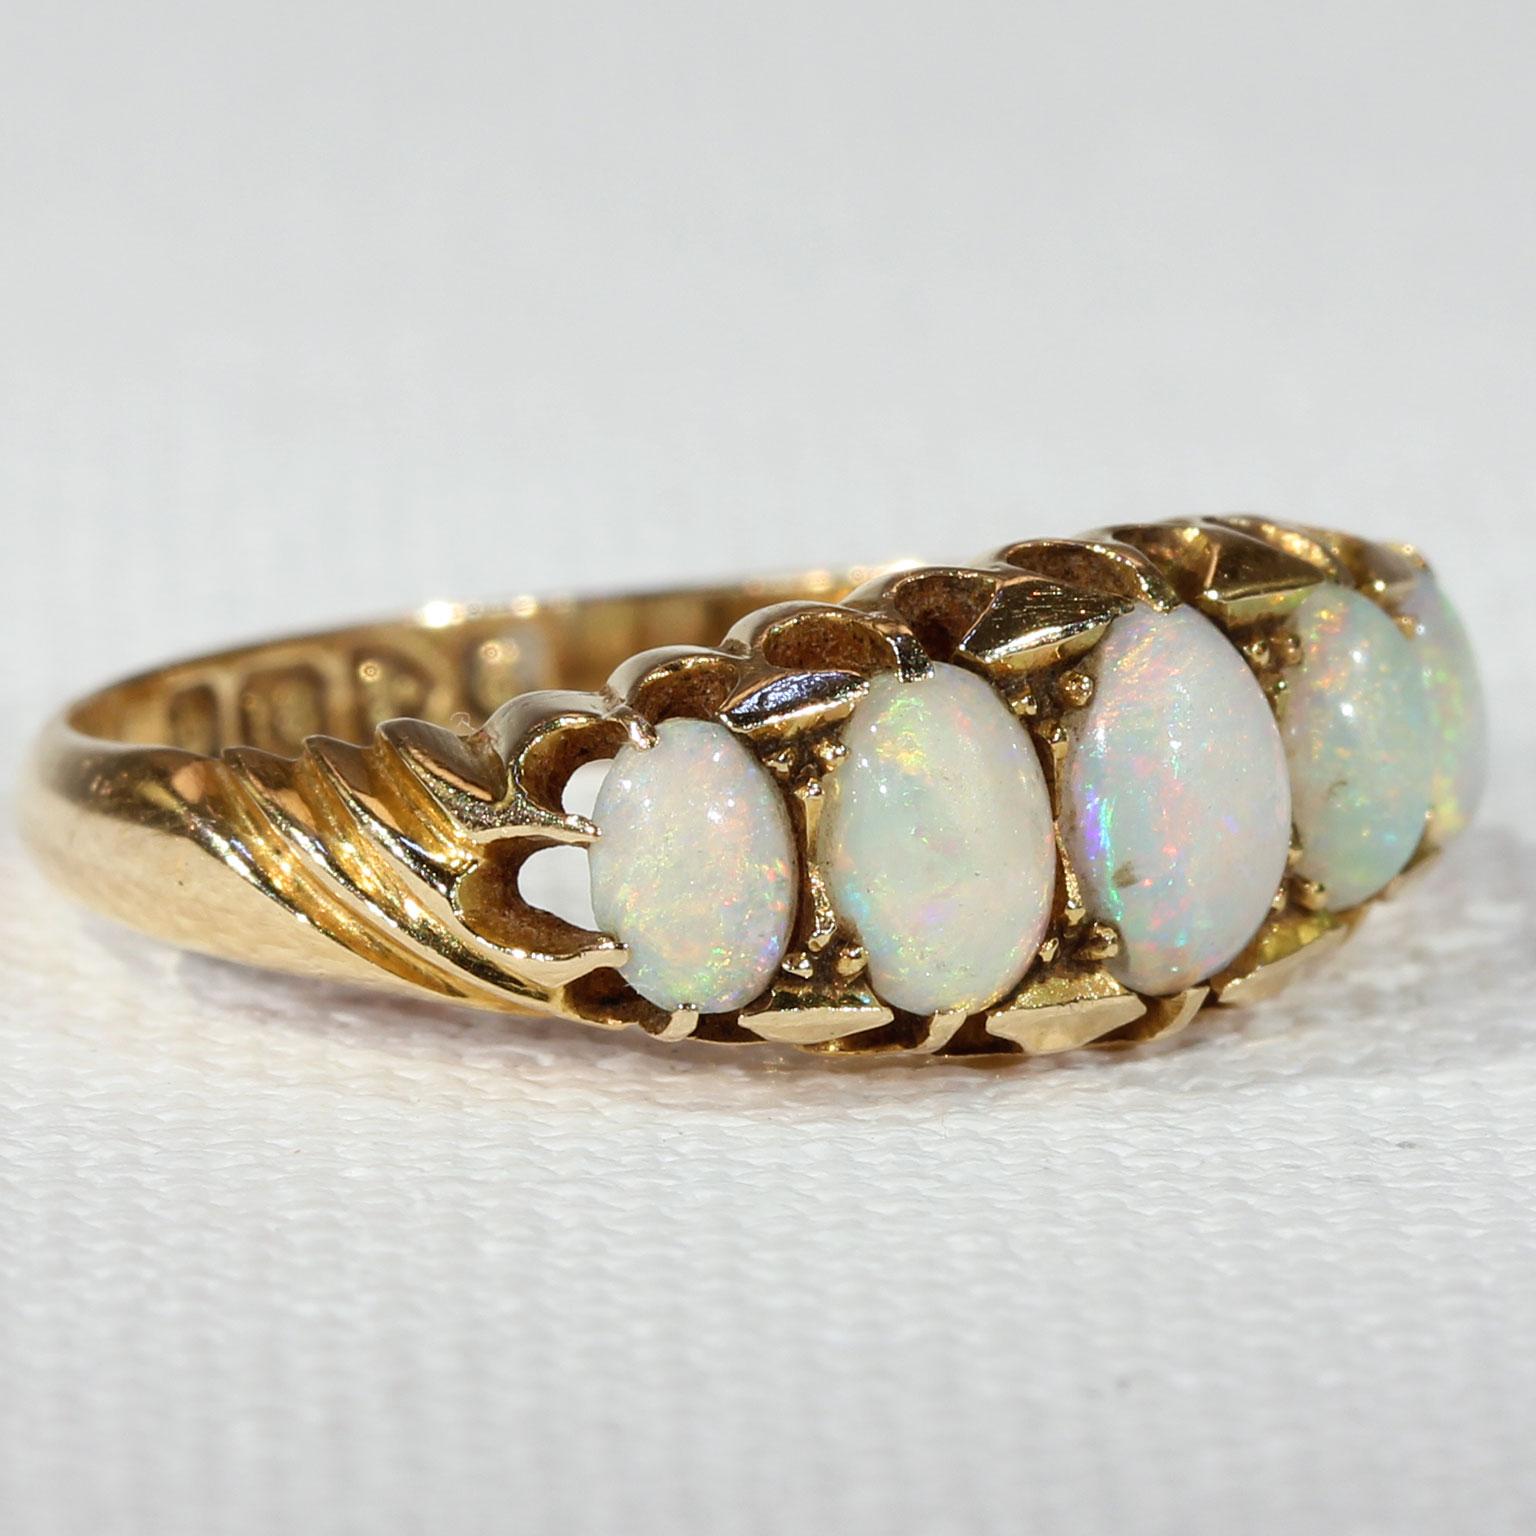 Antique 5 Stone Opal Gold Ring Hallmarked 1905